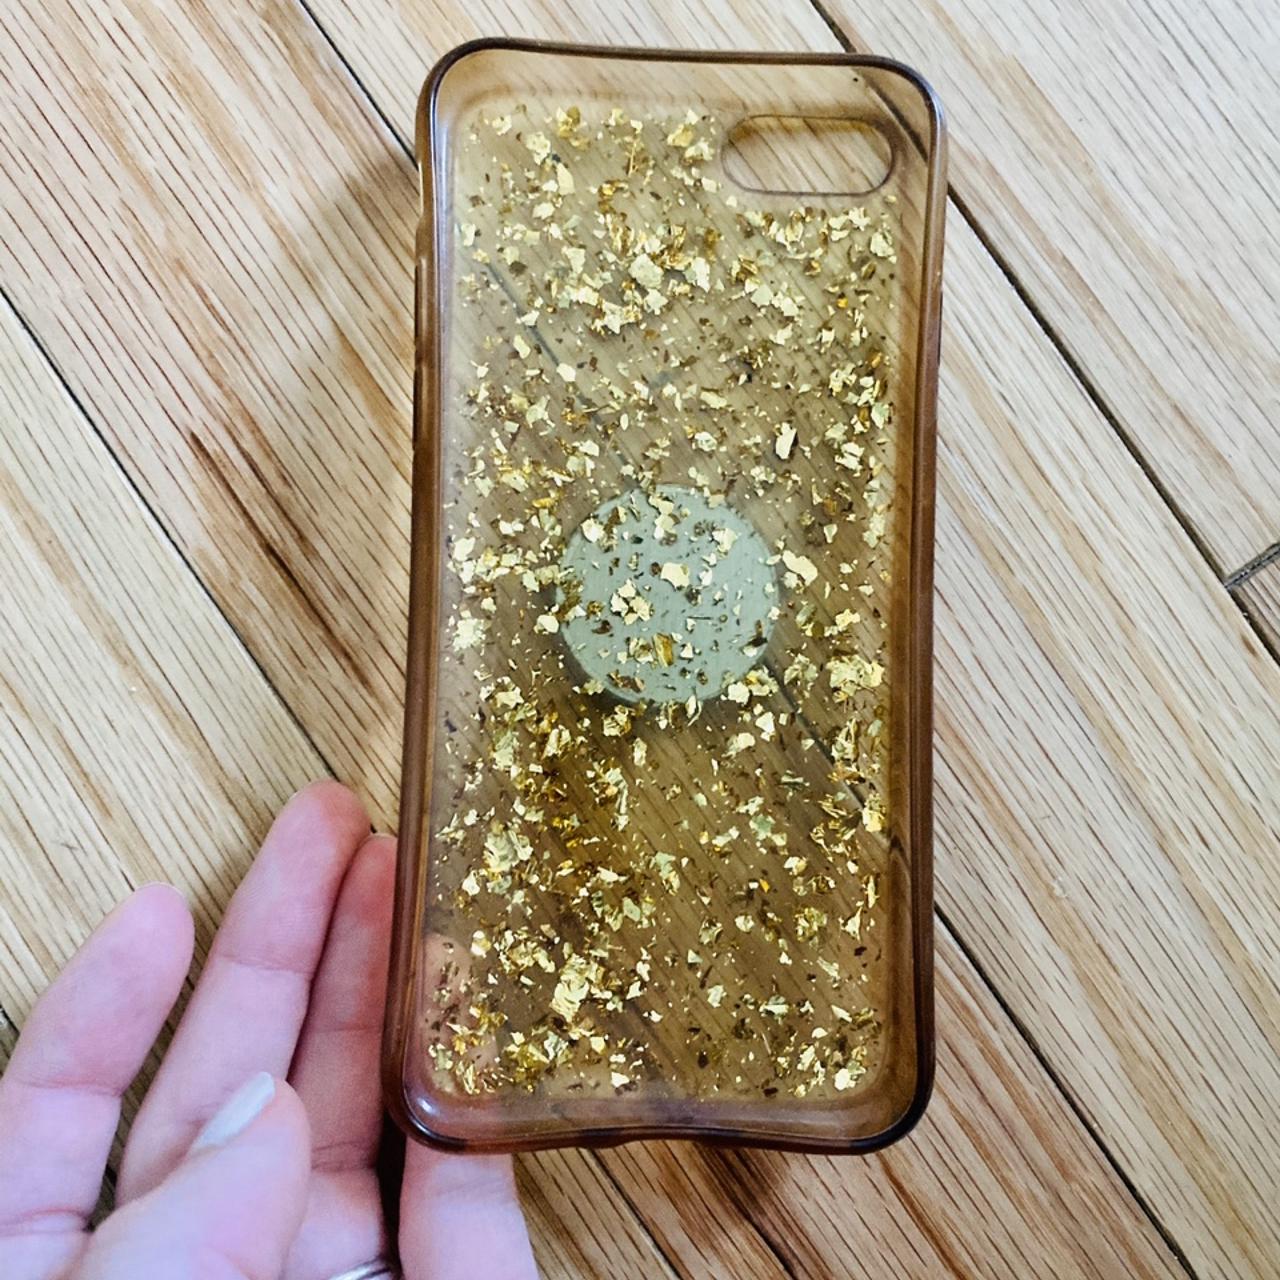 Product Image 2 - Gold flake iPhone 8 or